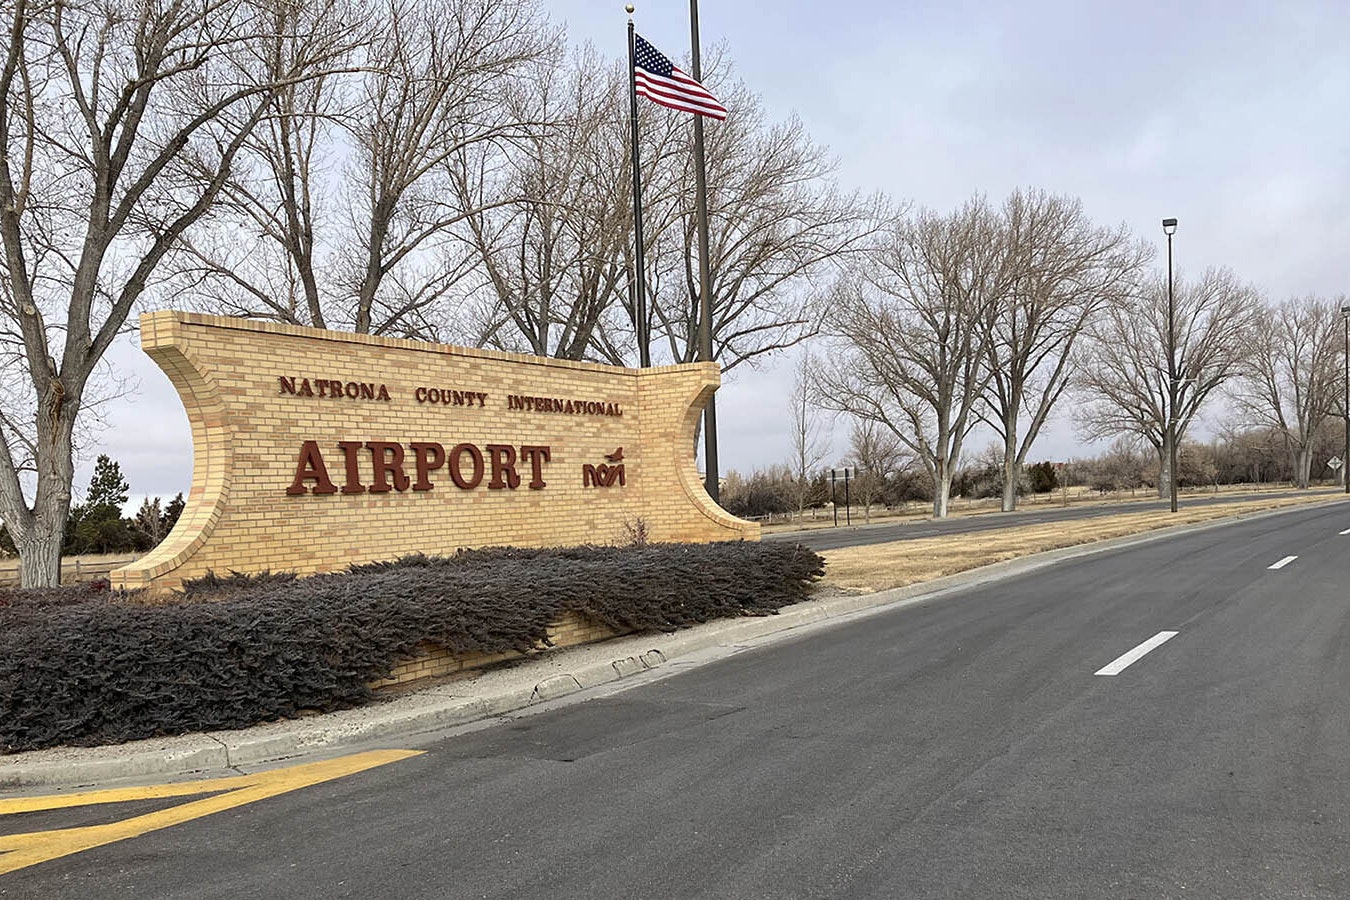 The Natrona County commission Tuesday agreed to pay for continued SkyWest Delta Connection service from Casper to Salt Lake City.